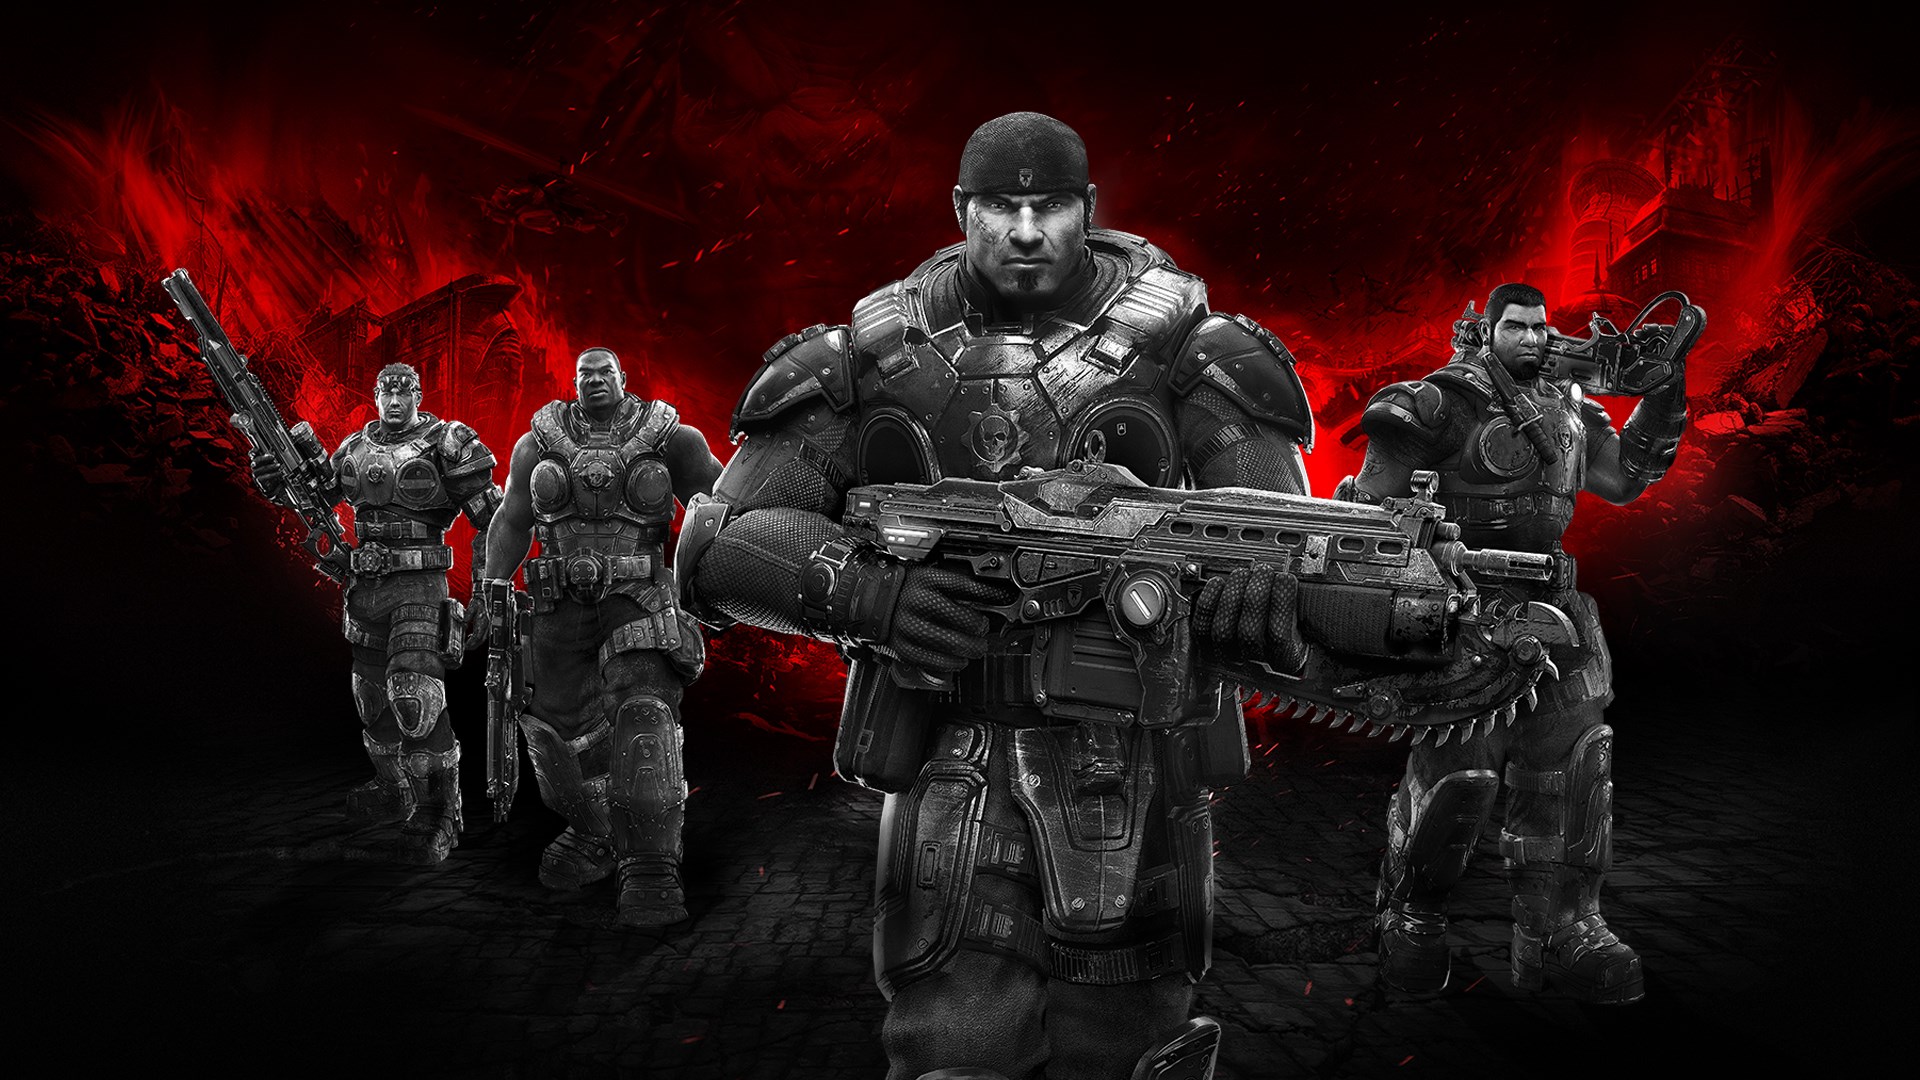 GEARS OF WAR Ultimate Edition Trailer [E3 2015] Xbox One 